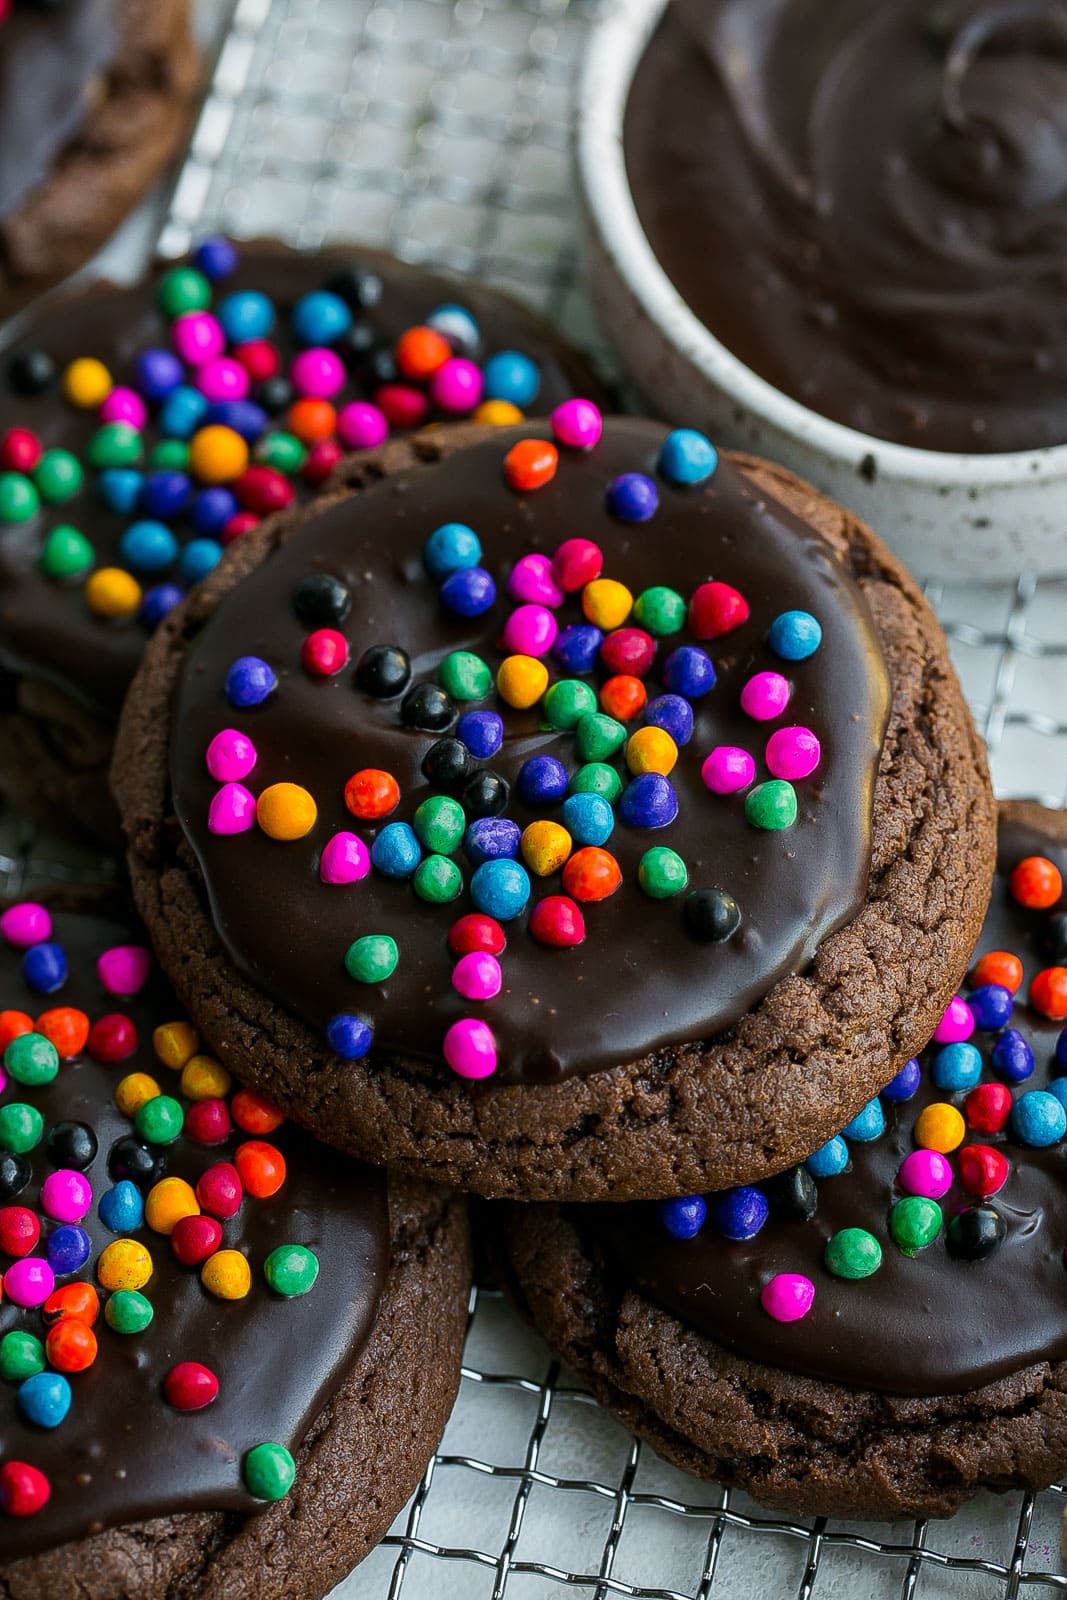 Jumbo cookie with chocolate frosting and sprinkles.